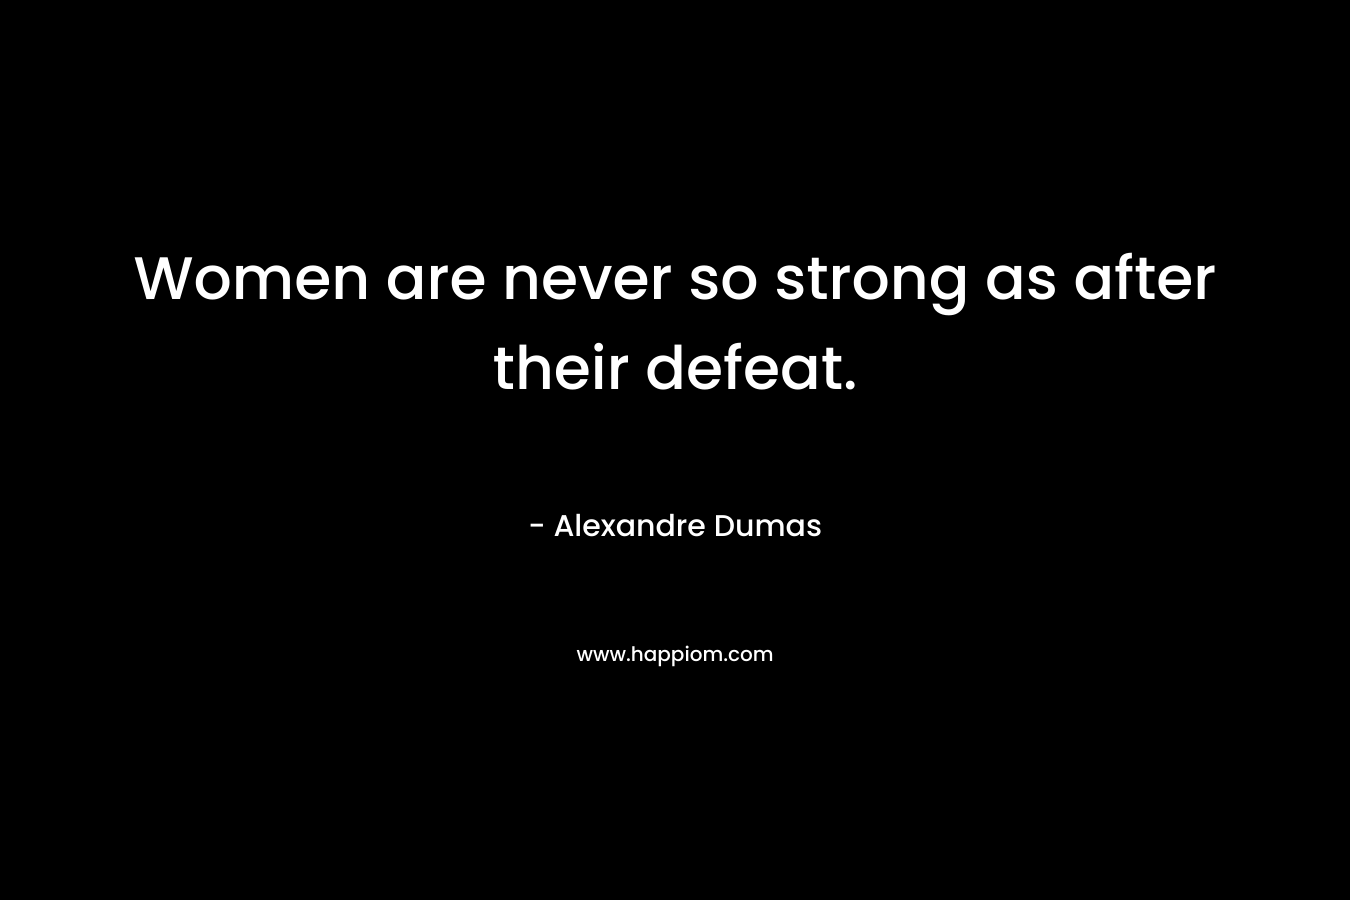 Women are never so strong as after their defeat.